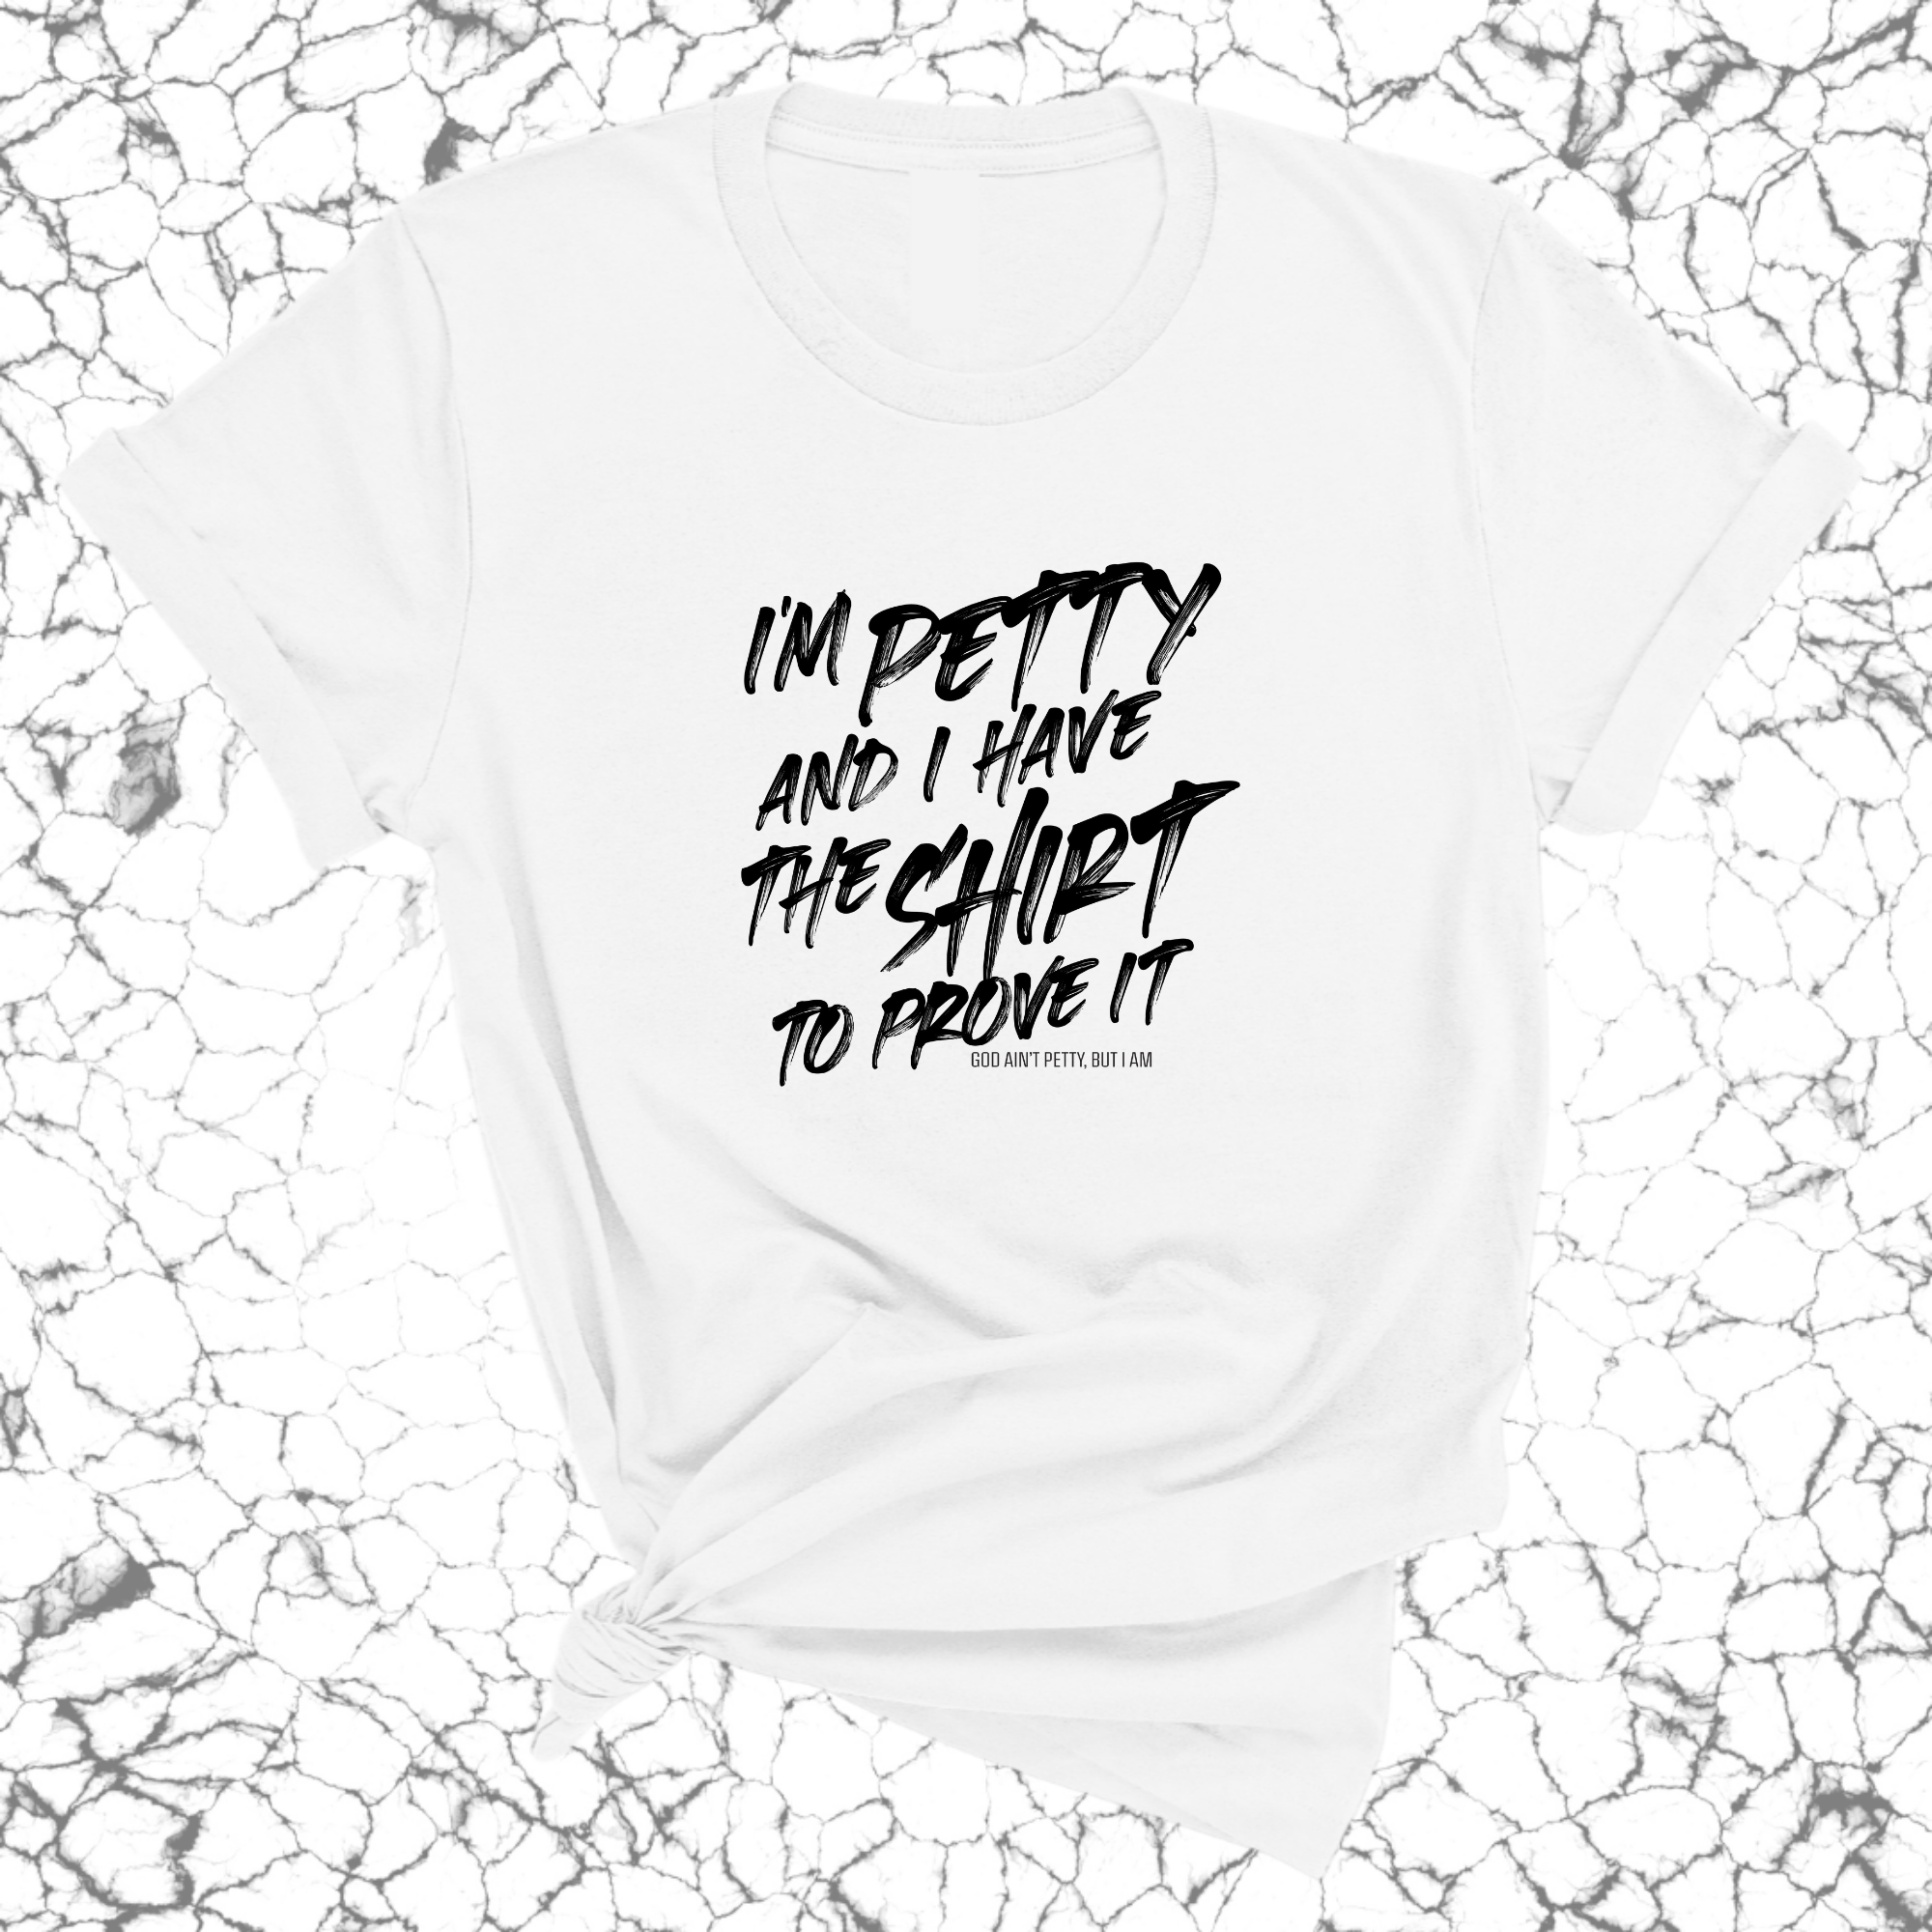 I'm Petty and I have the shirt to prove it Unisex Tee-T-Shirt-The Original God Ain't Petty But I Am